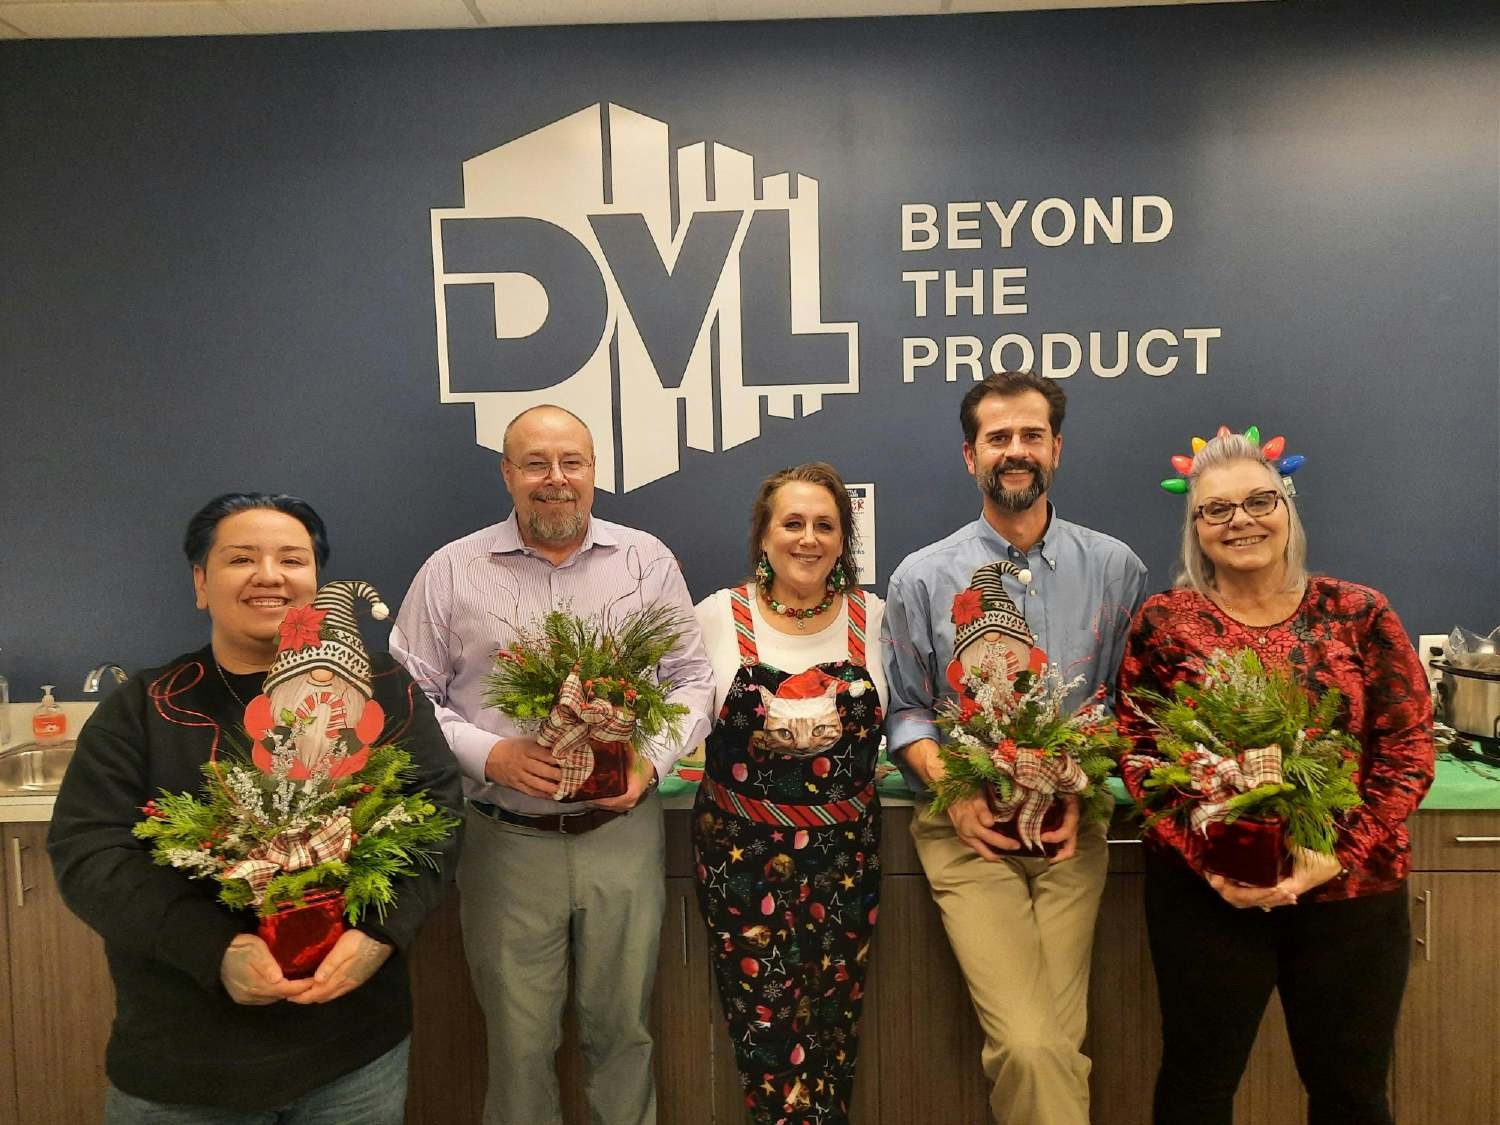 Proud winners of our annual holiday potluck lunch in our Centennial CO location where they competed for festive flowers.